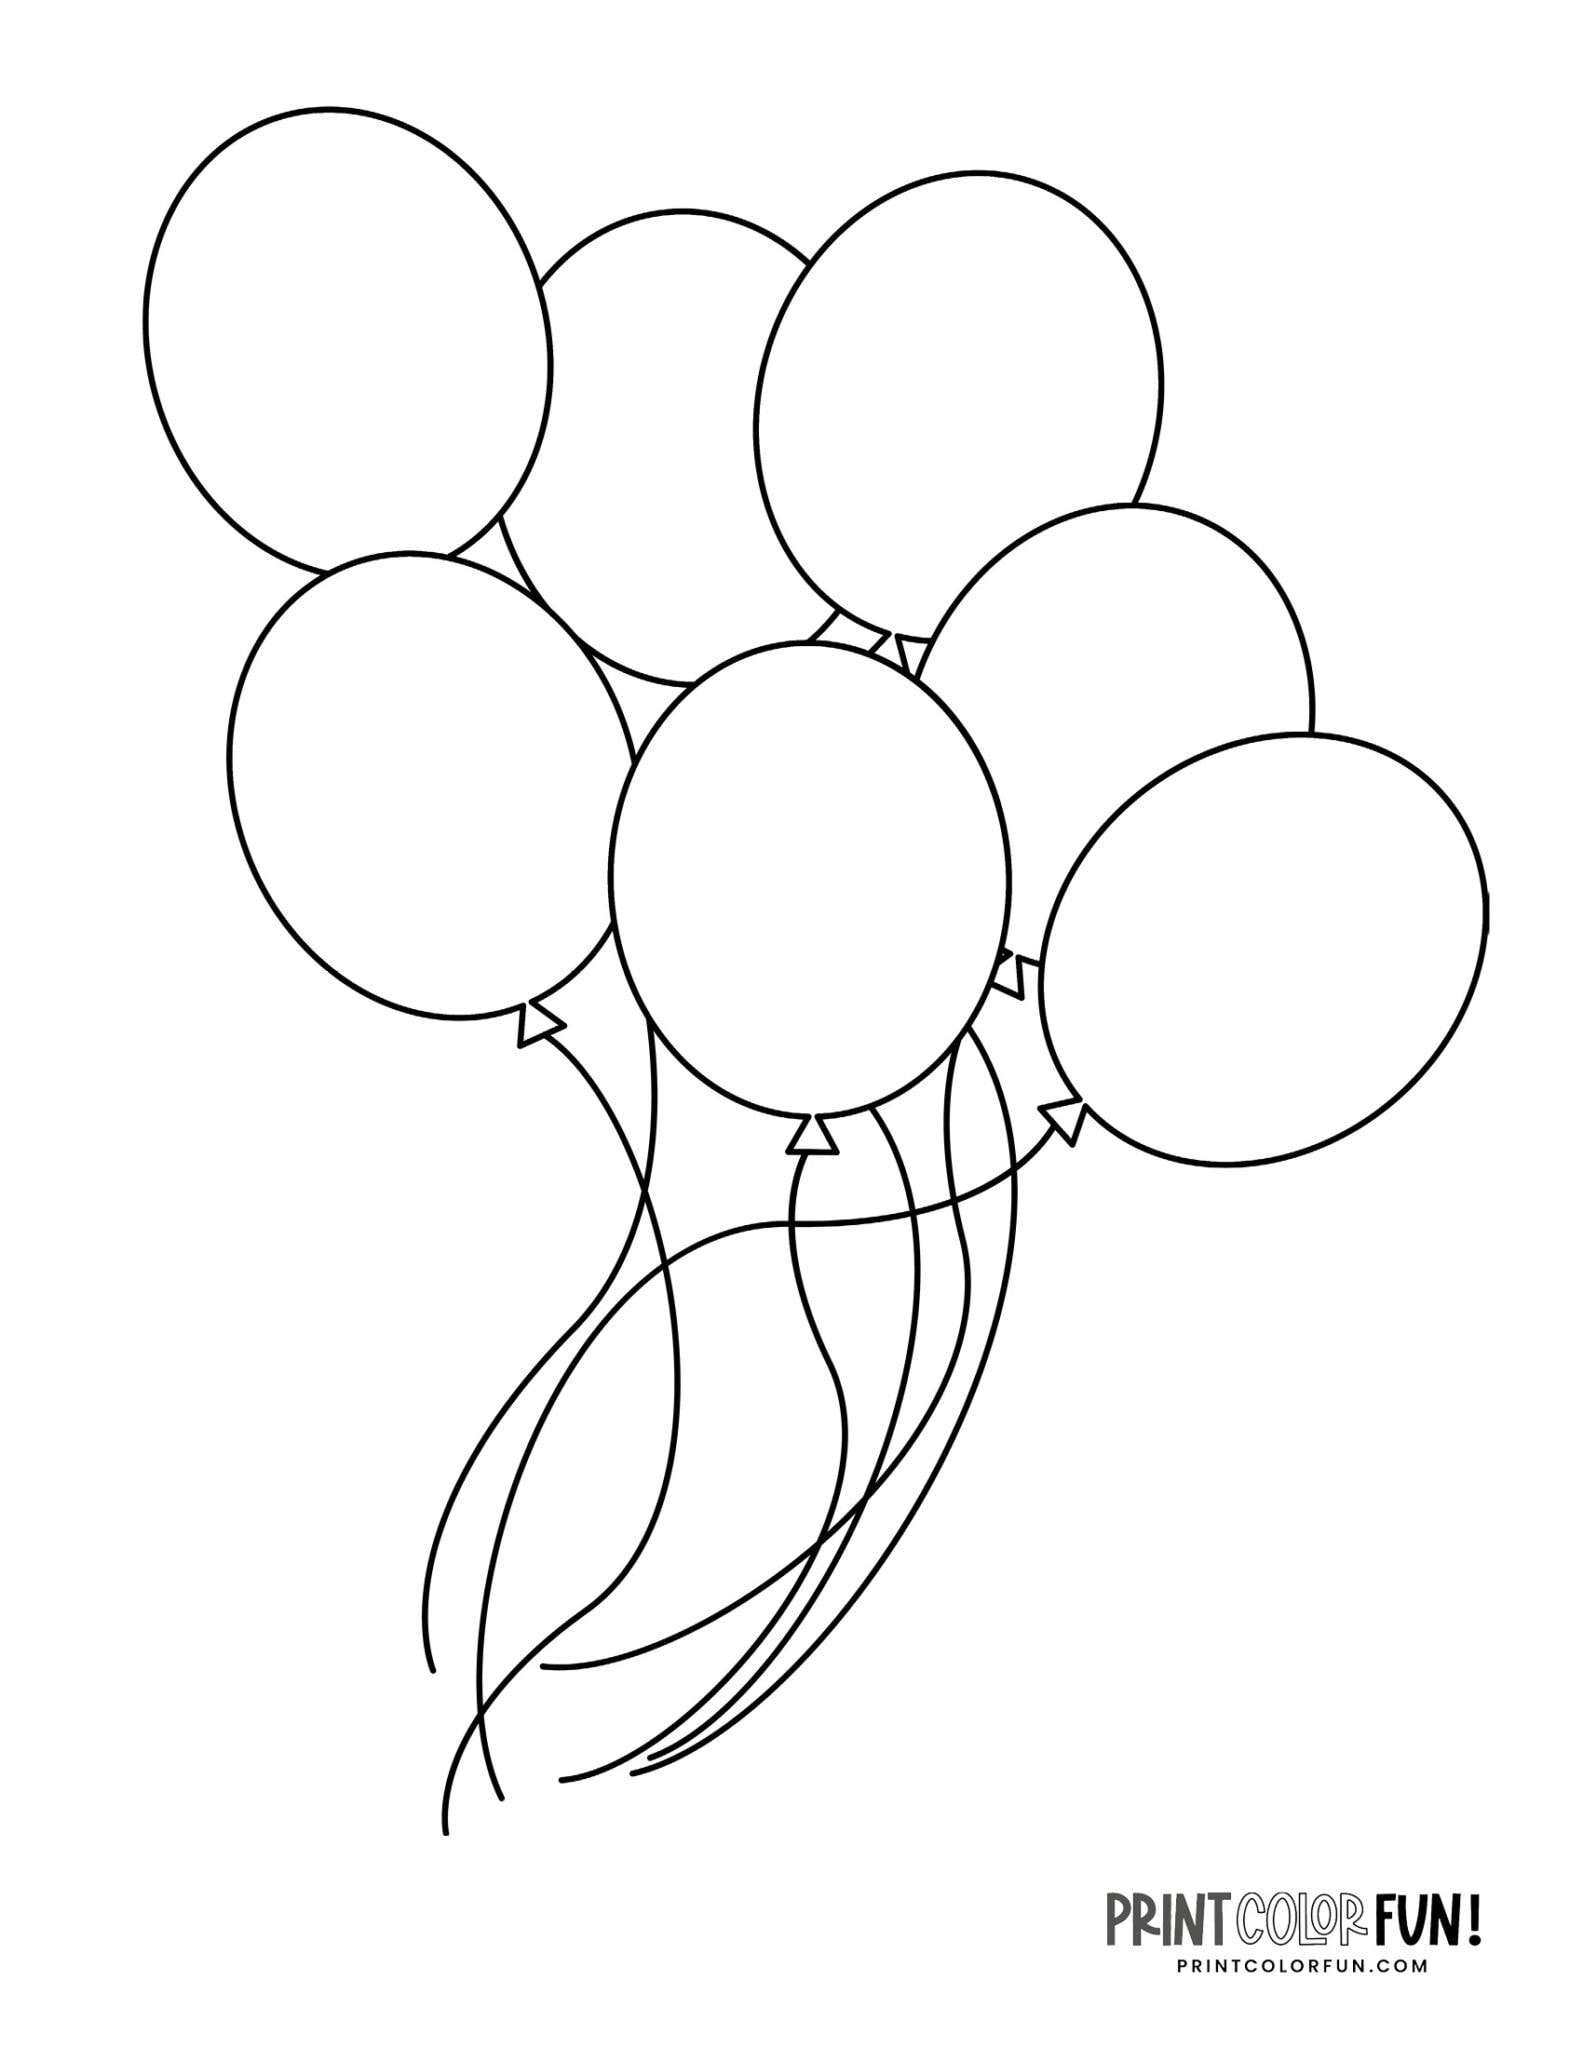 Party balloon coloring pages Print Color Fun!